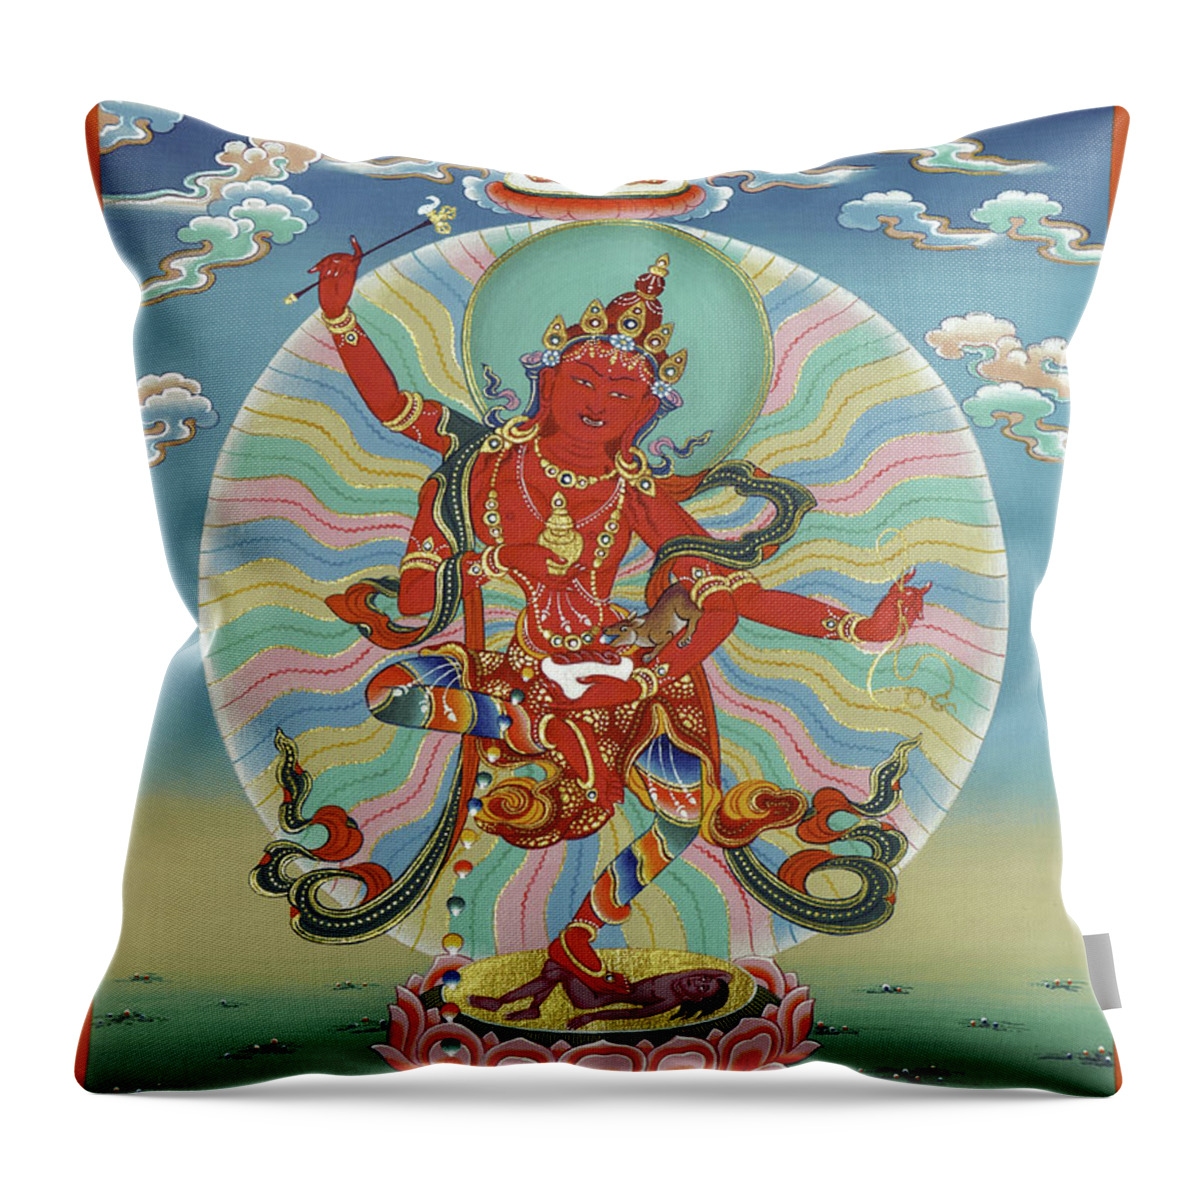 Red Throw Pillow featuring the painting Red Tara by Sergey Noskov